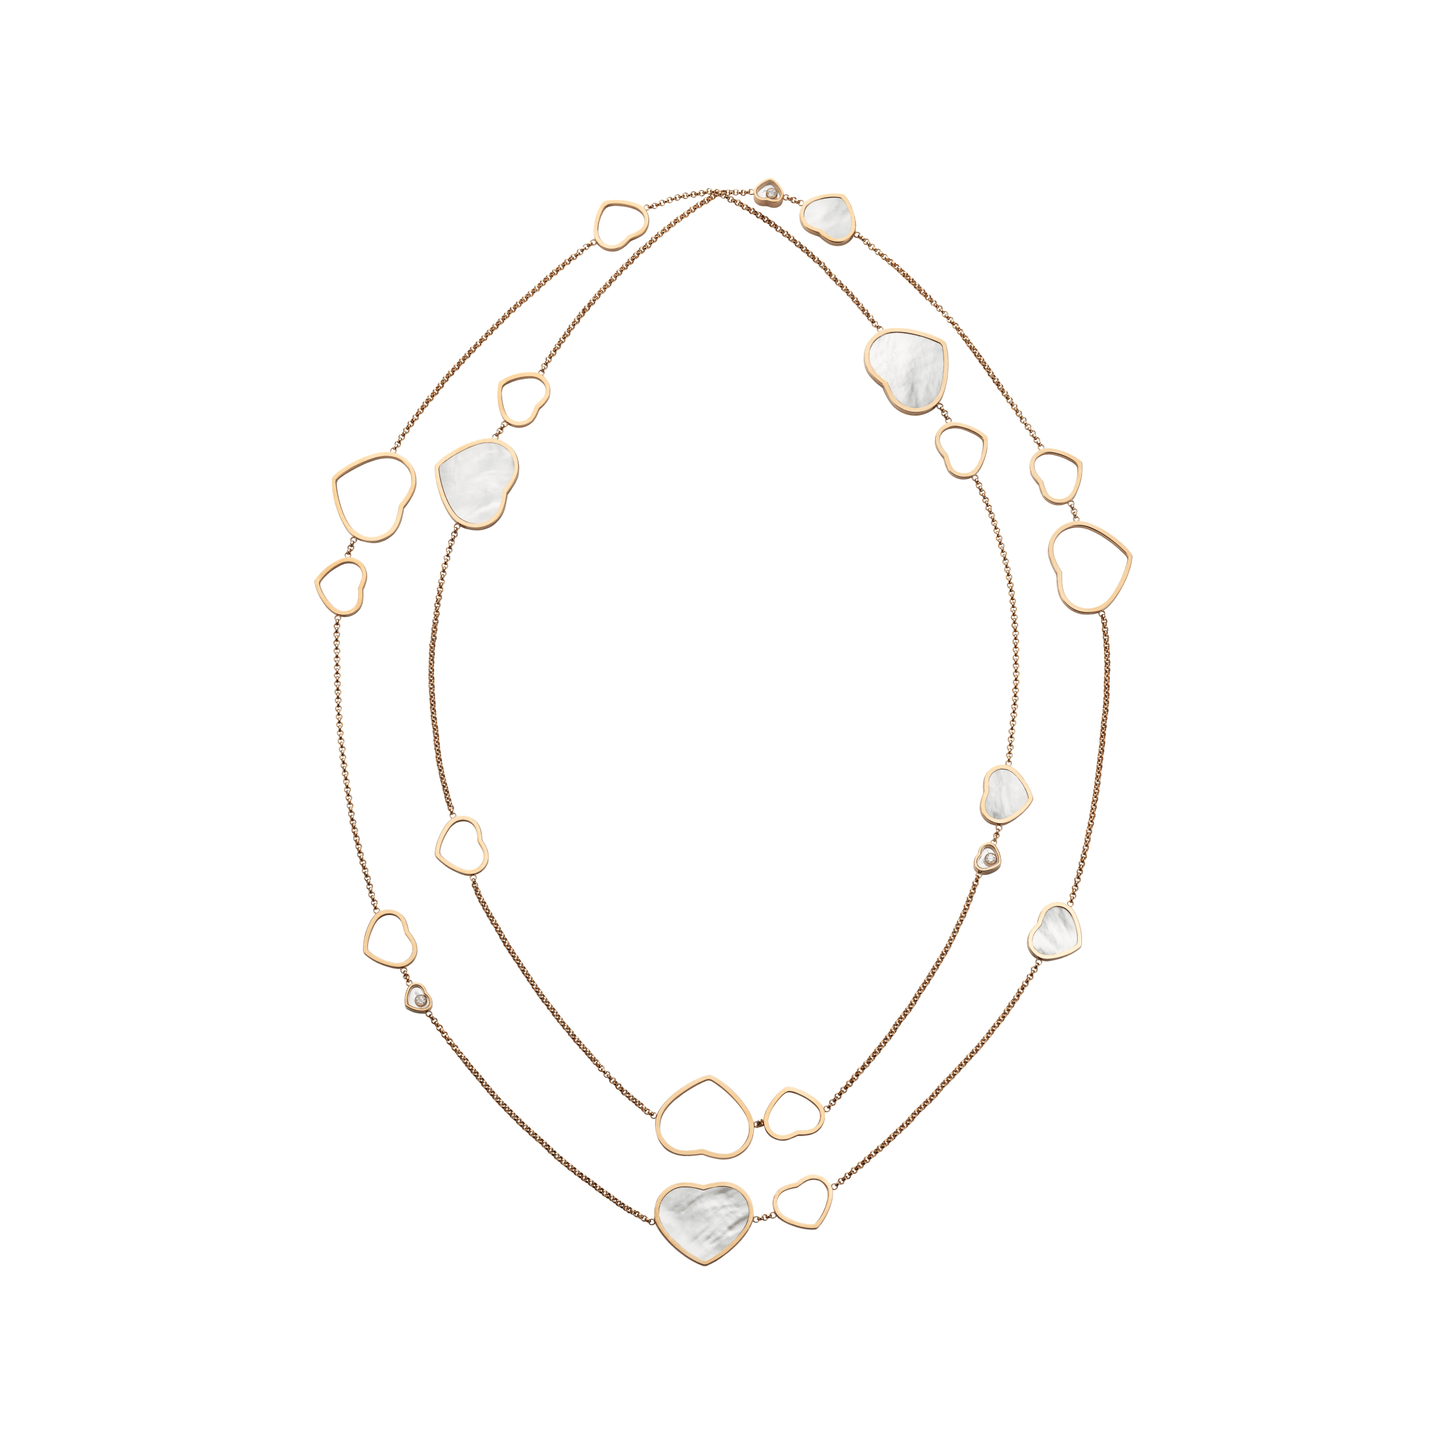 HAPPY HEARTS SAUTOIR NECKLACE, ETHICAL ROSE GOLD, DIAMONDS, MOTHER-OF-PEARL 817482-5301